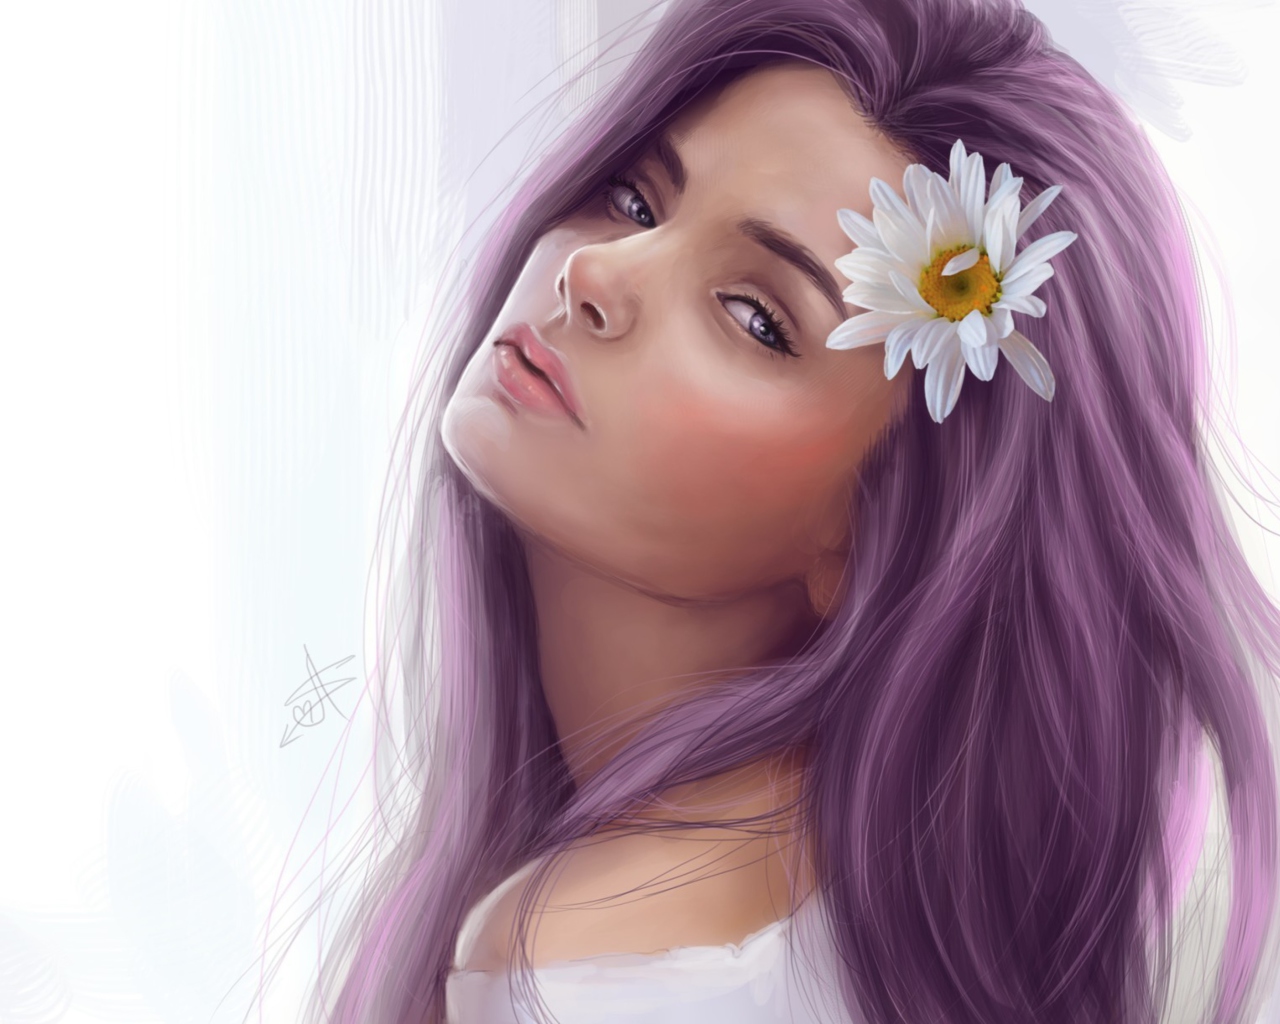 Girl With Purple Hair Painting wallpaper 1280x1024